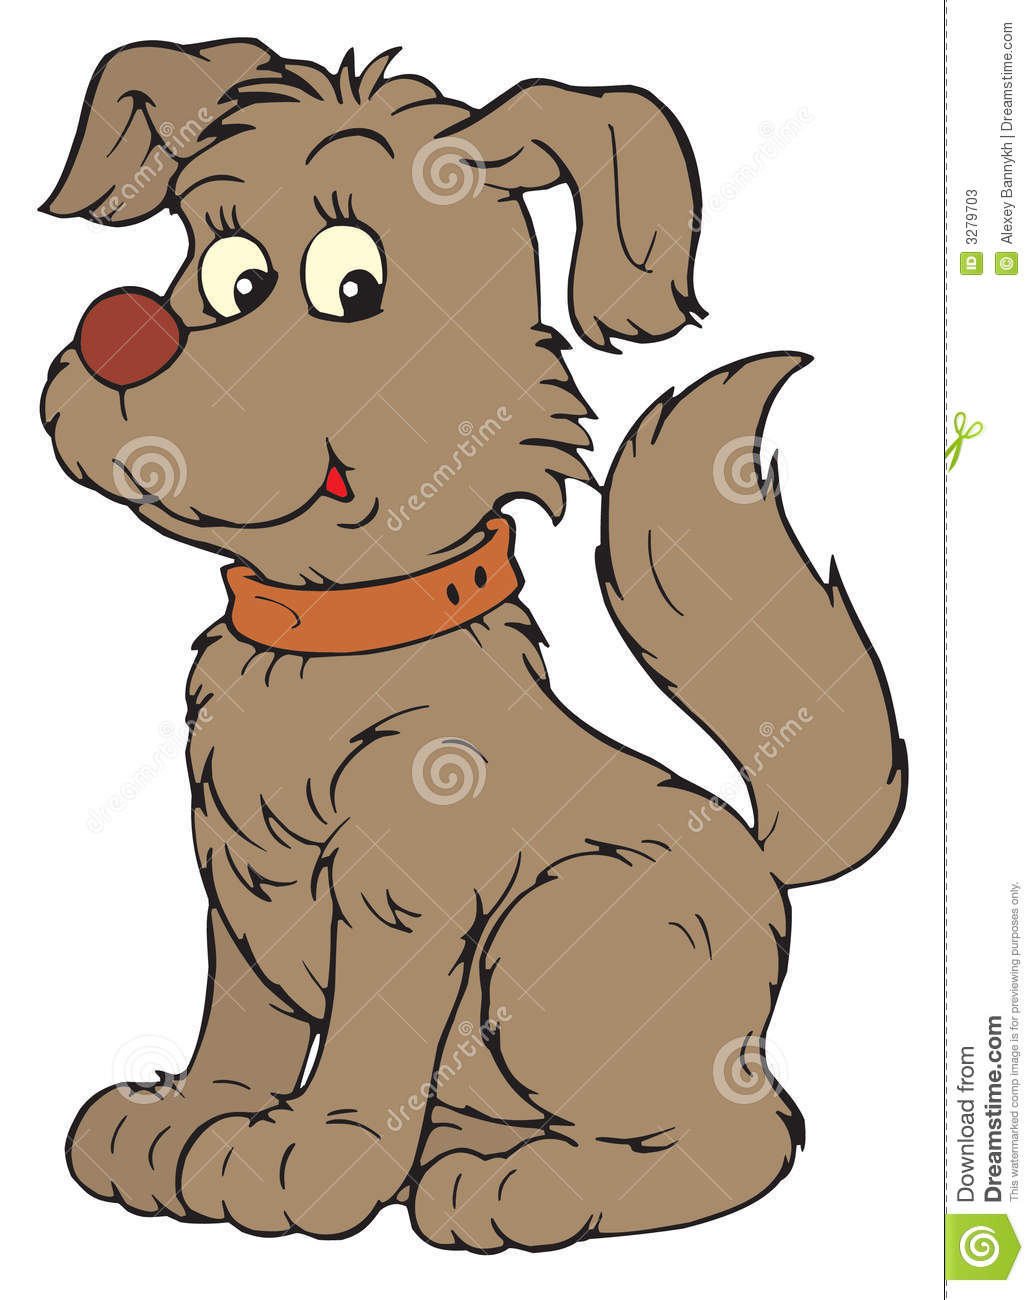 clipart for dog - photo #39